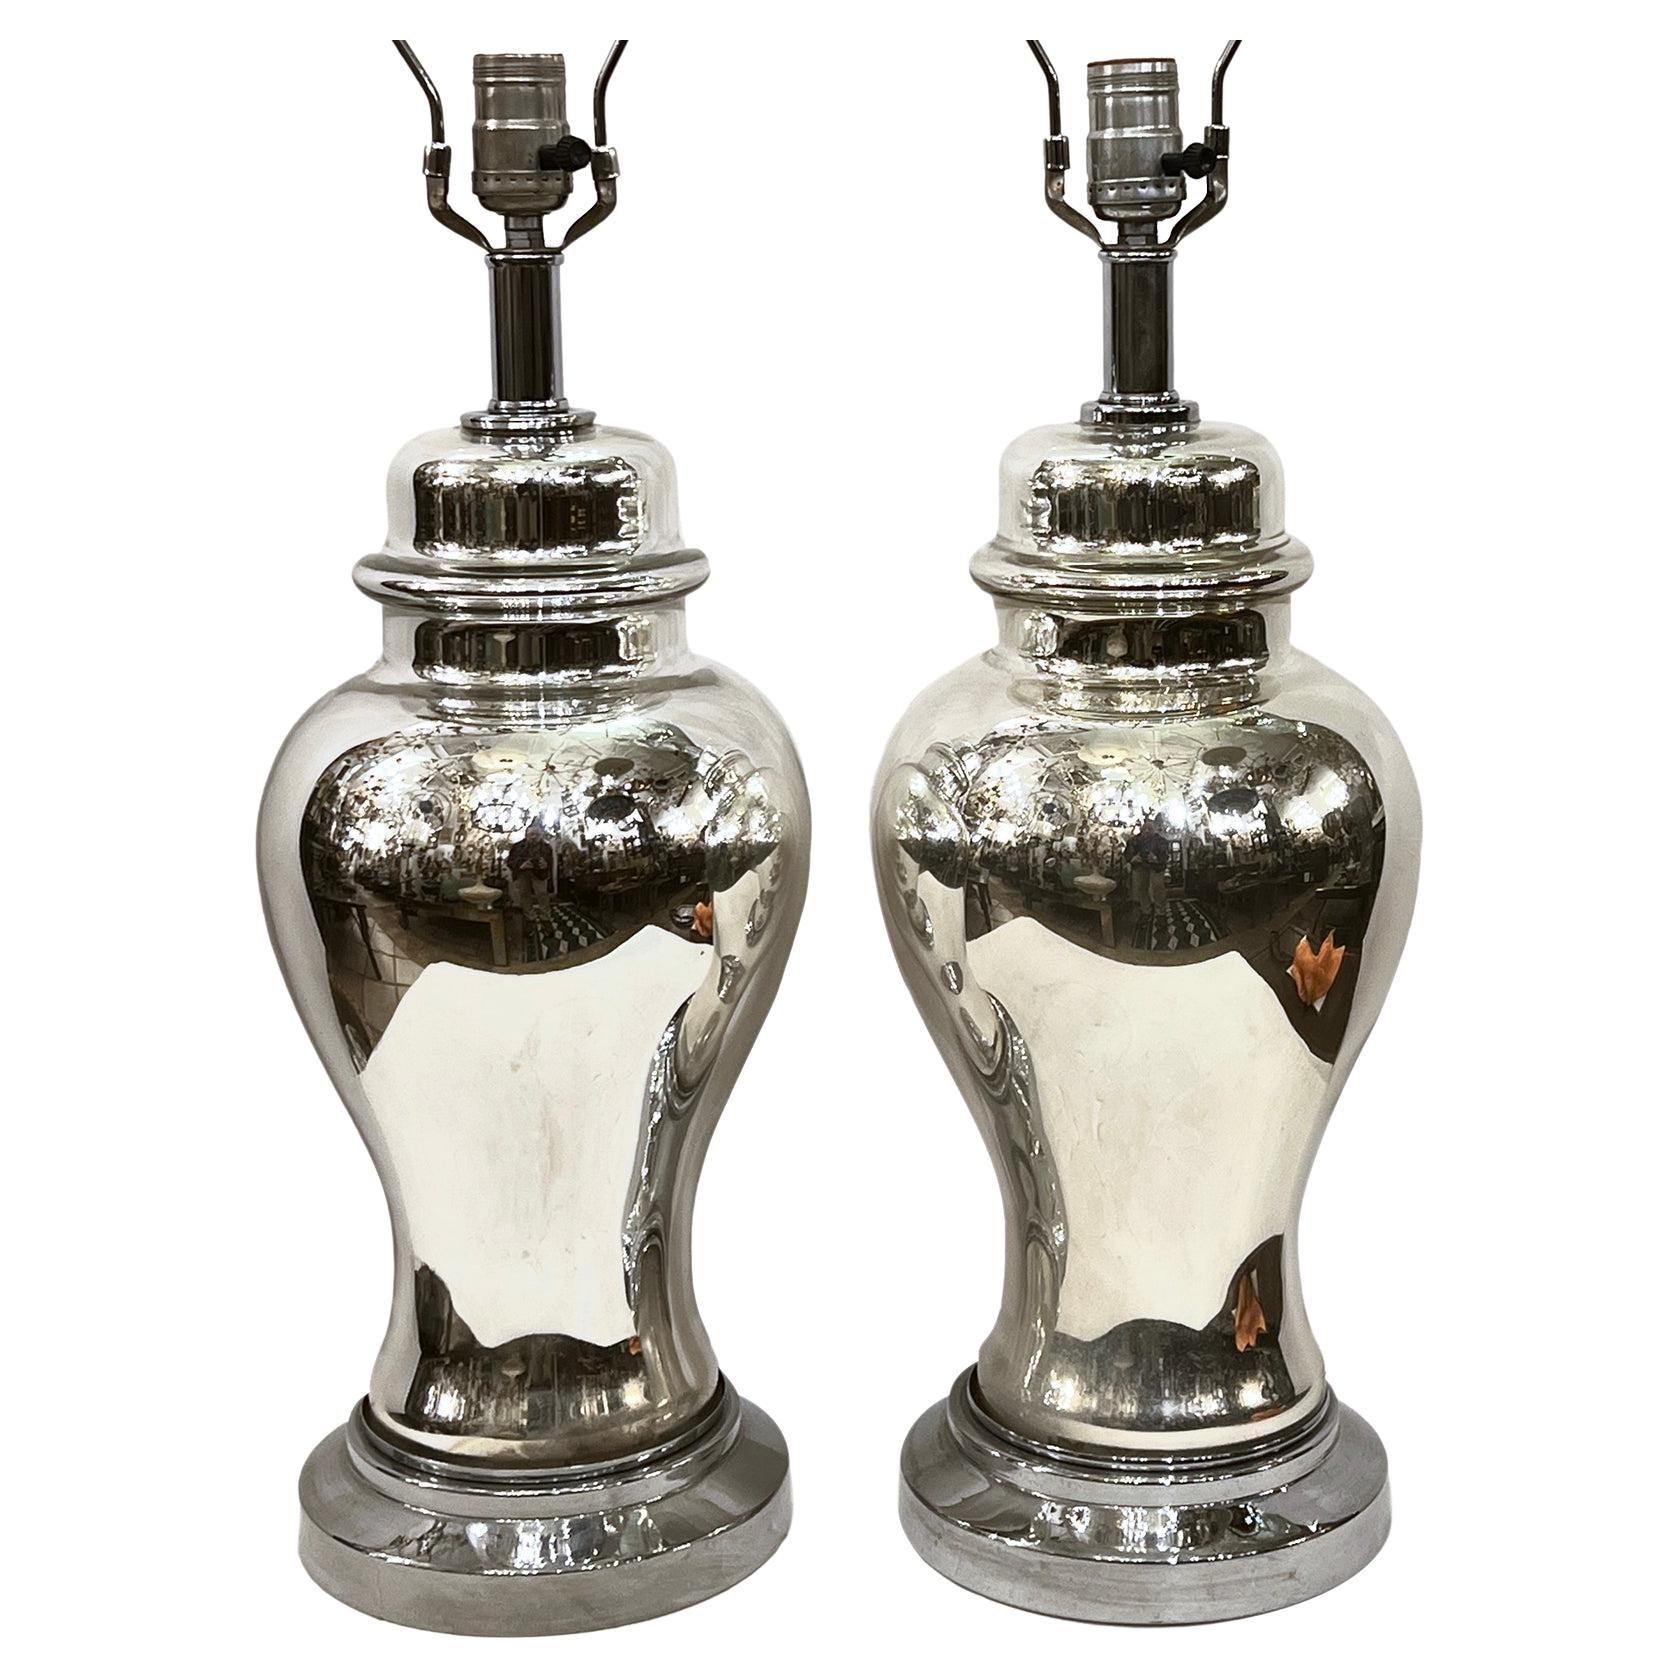 Pair of French circa 1920s mercury glass table lamps with metal bases.

Measurements:
Height of body: 17